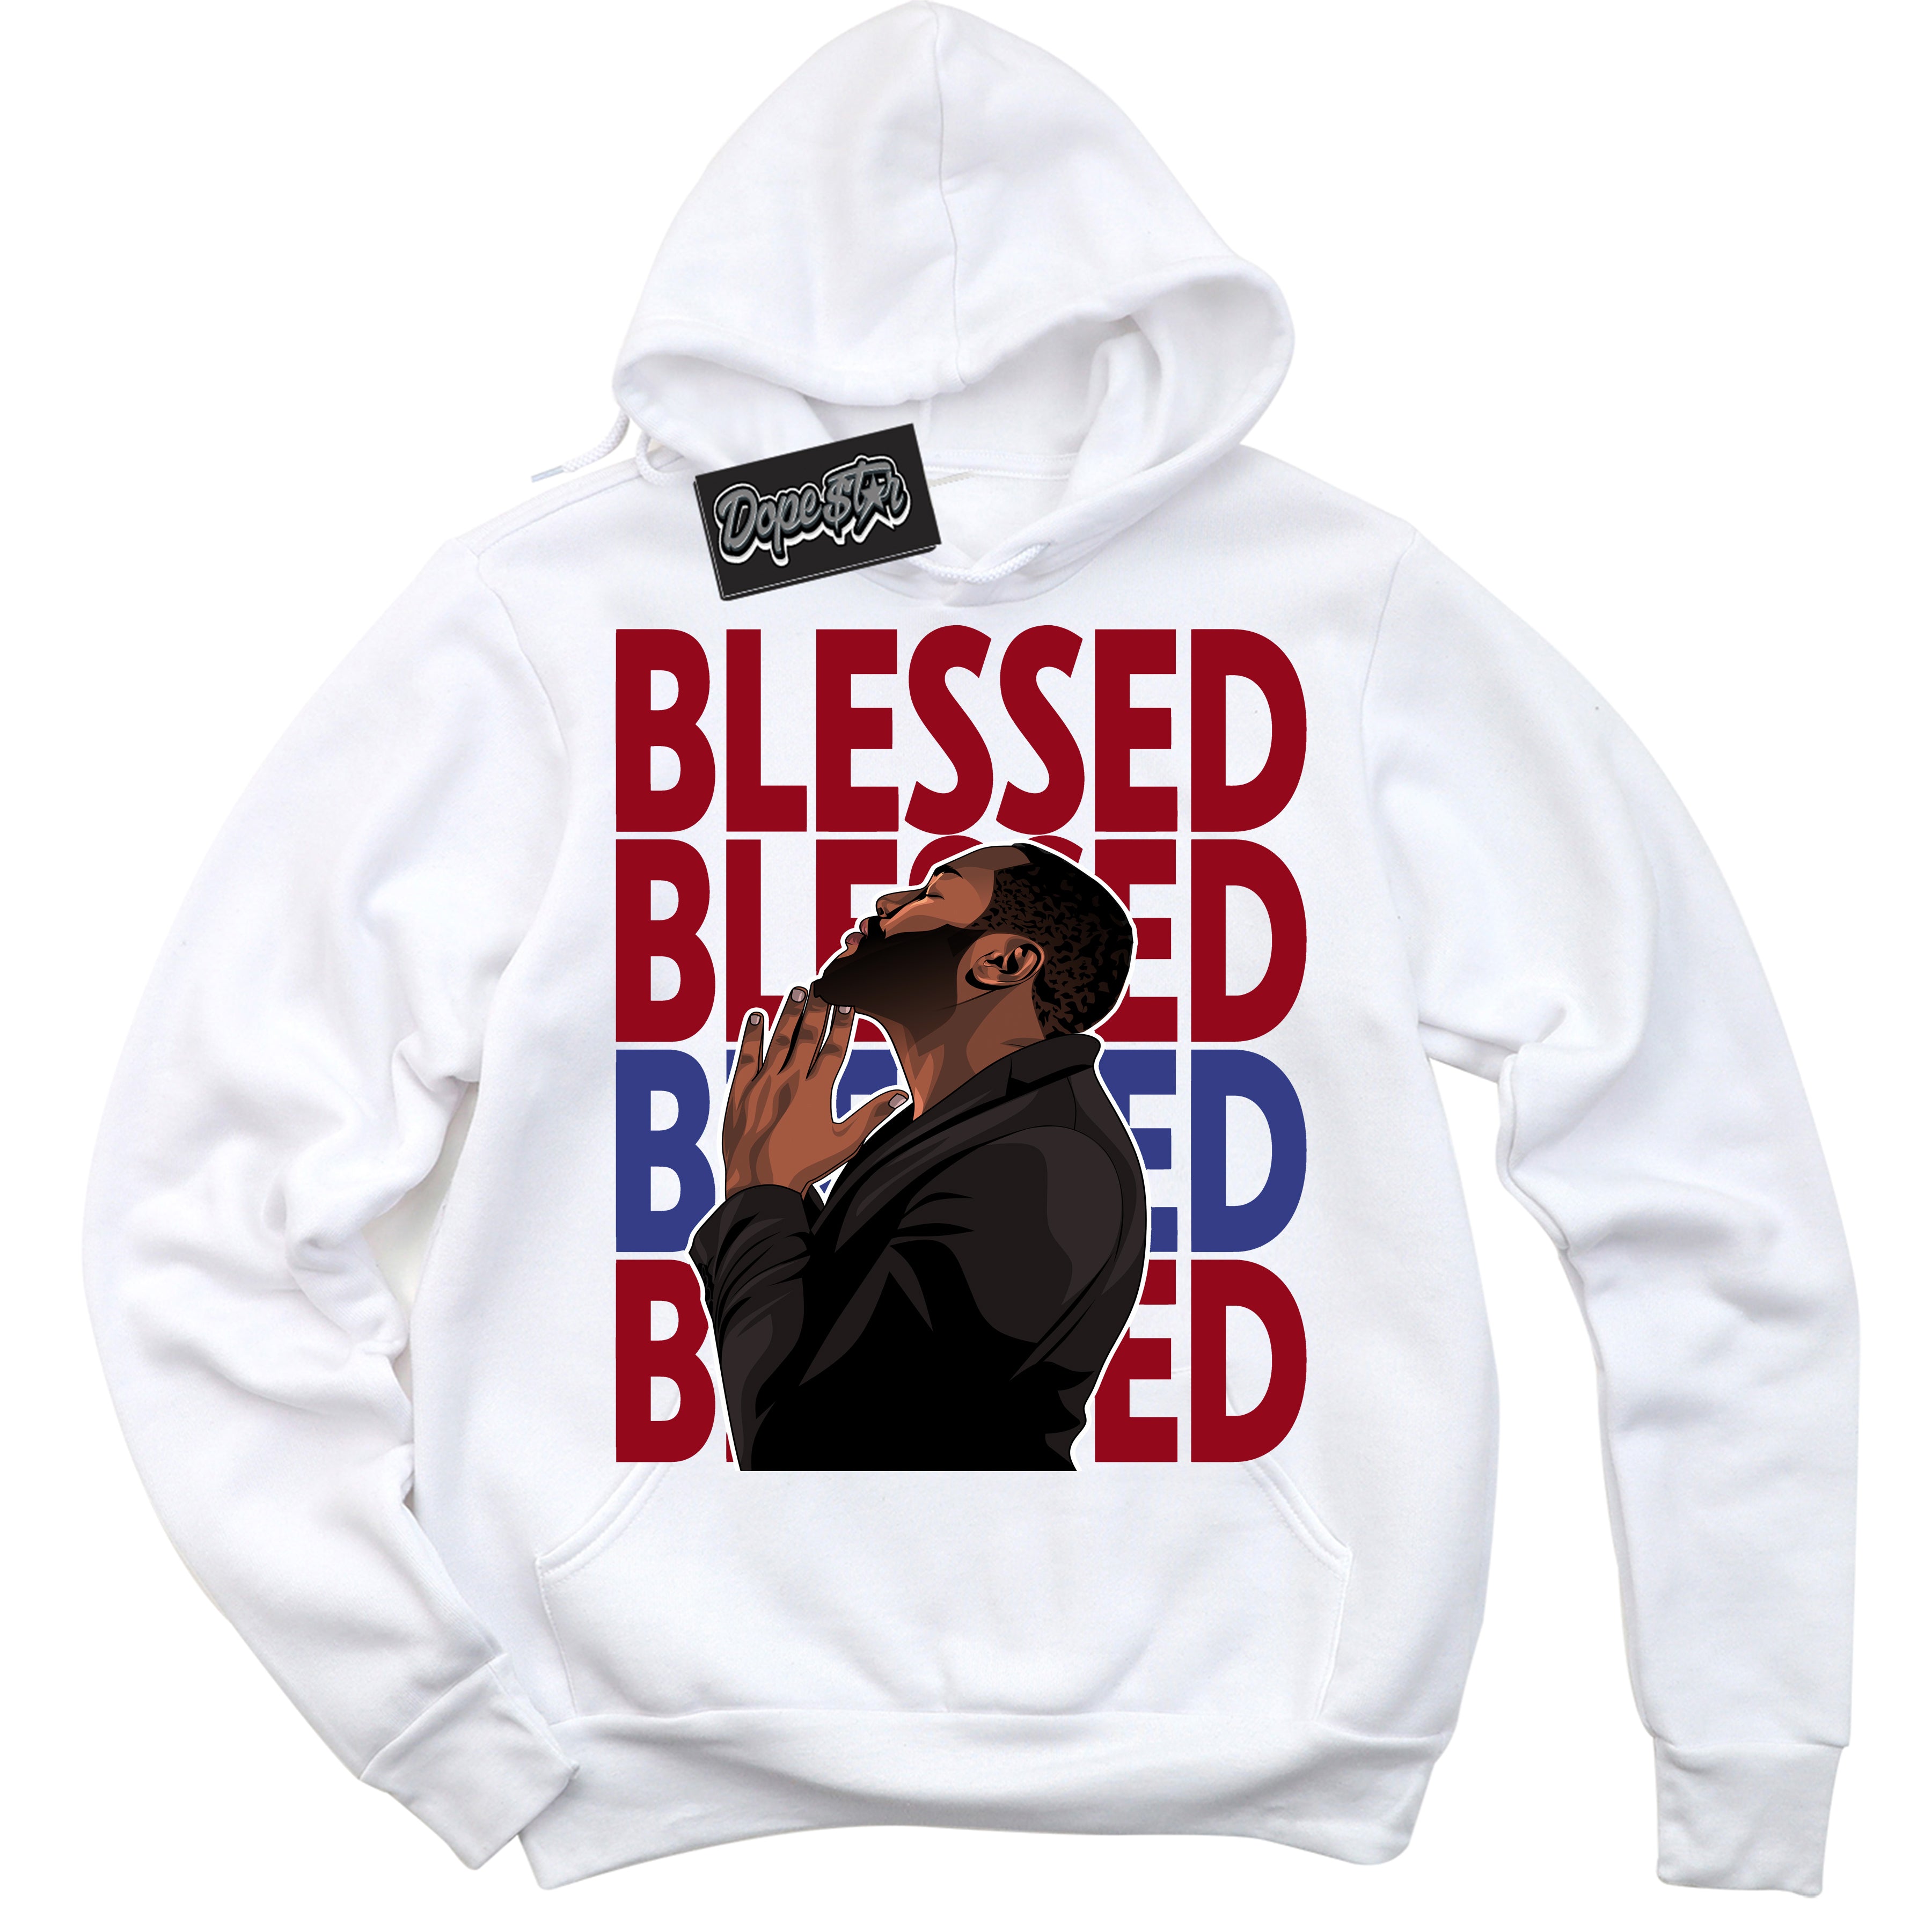 Cool White Hoodie with “ God Blessed ”  design that Perfectly Matches Playoffs 8s Sneakers.